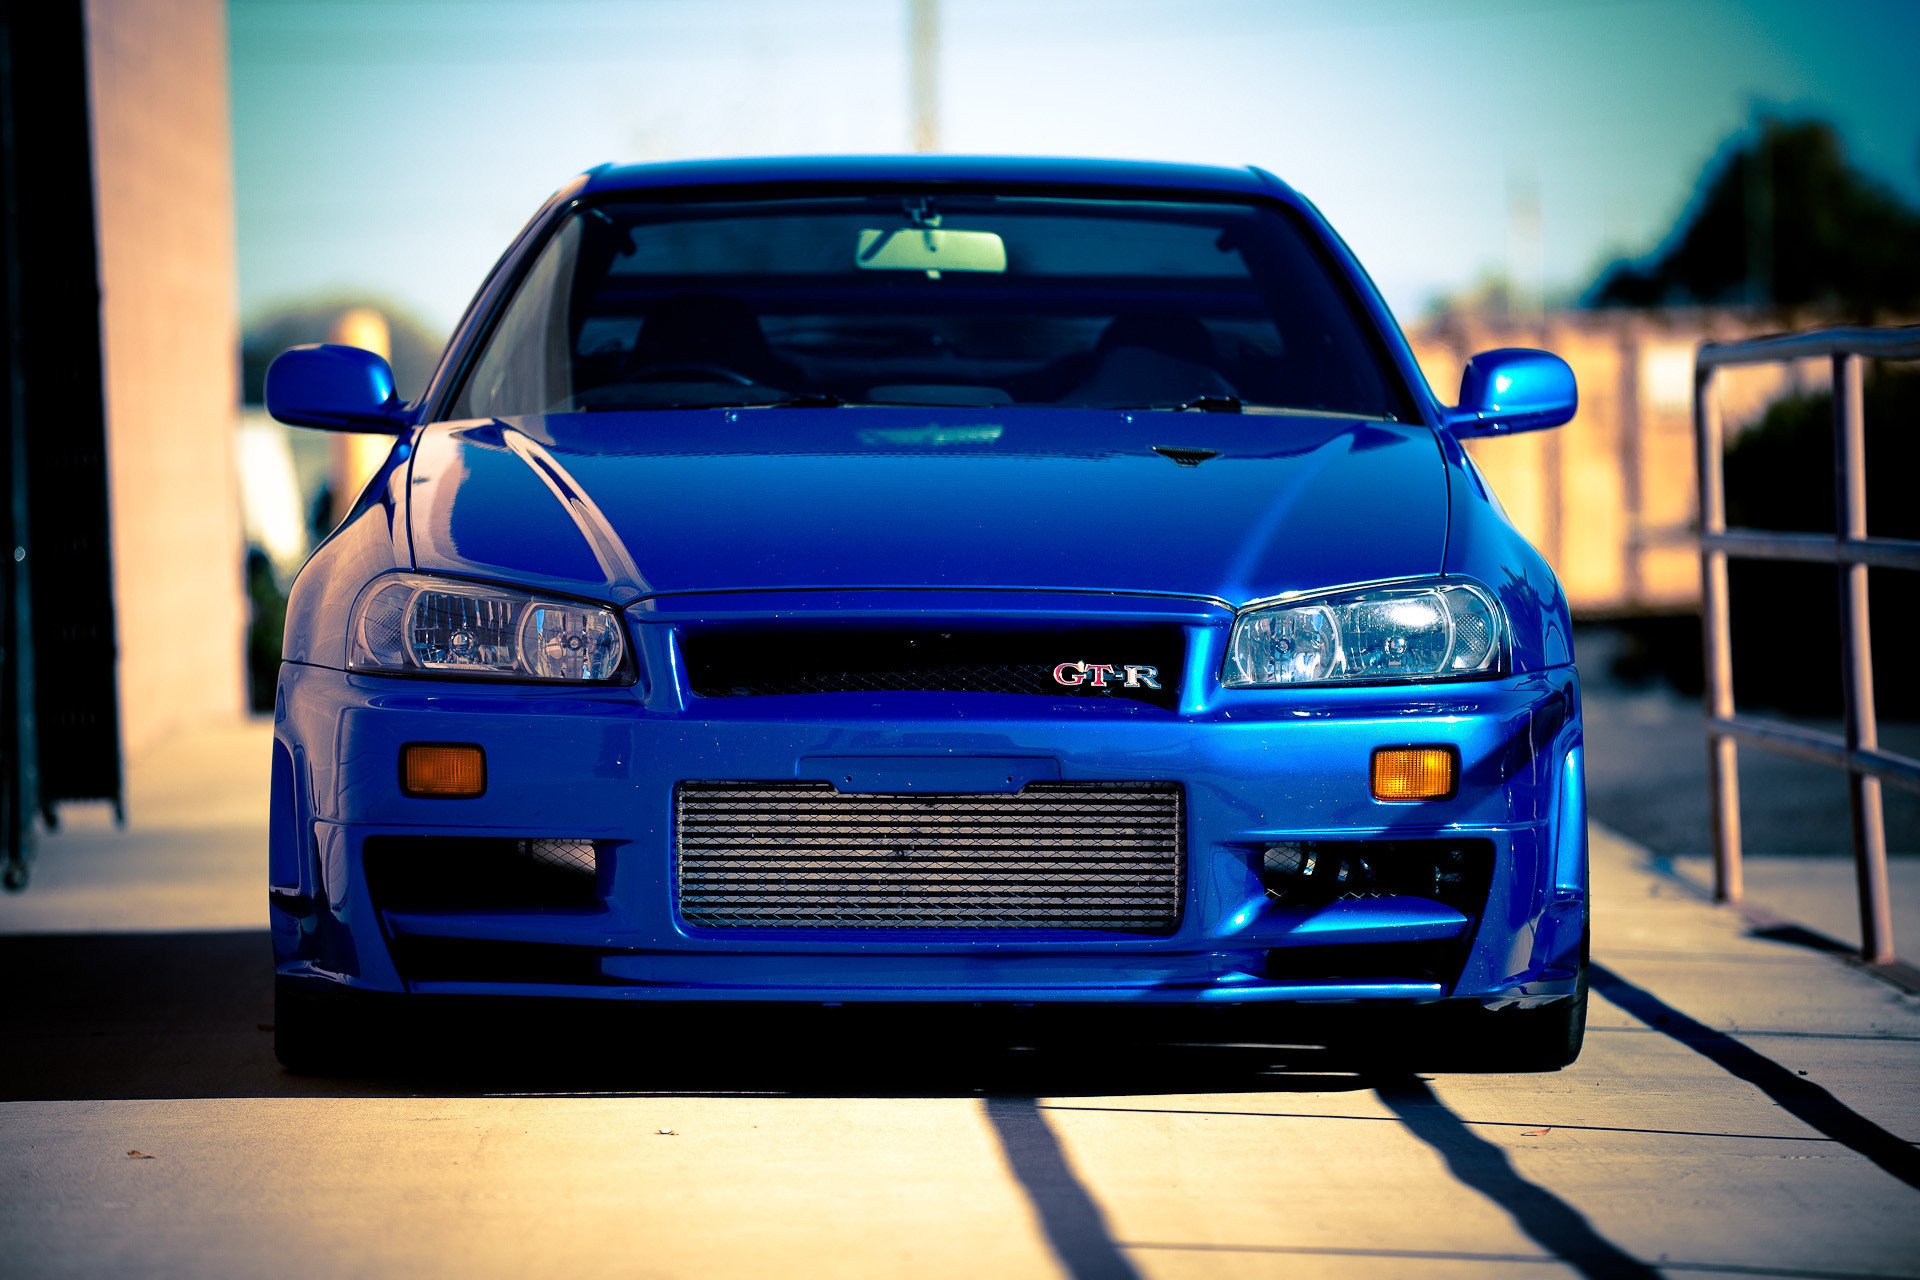 Nissan Skyline Gtr R34 Car Blue Tuning Wallpapers Hd Desktop And Mobile Backgrounds